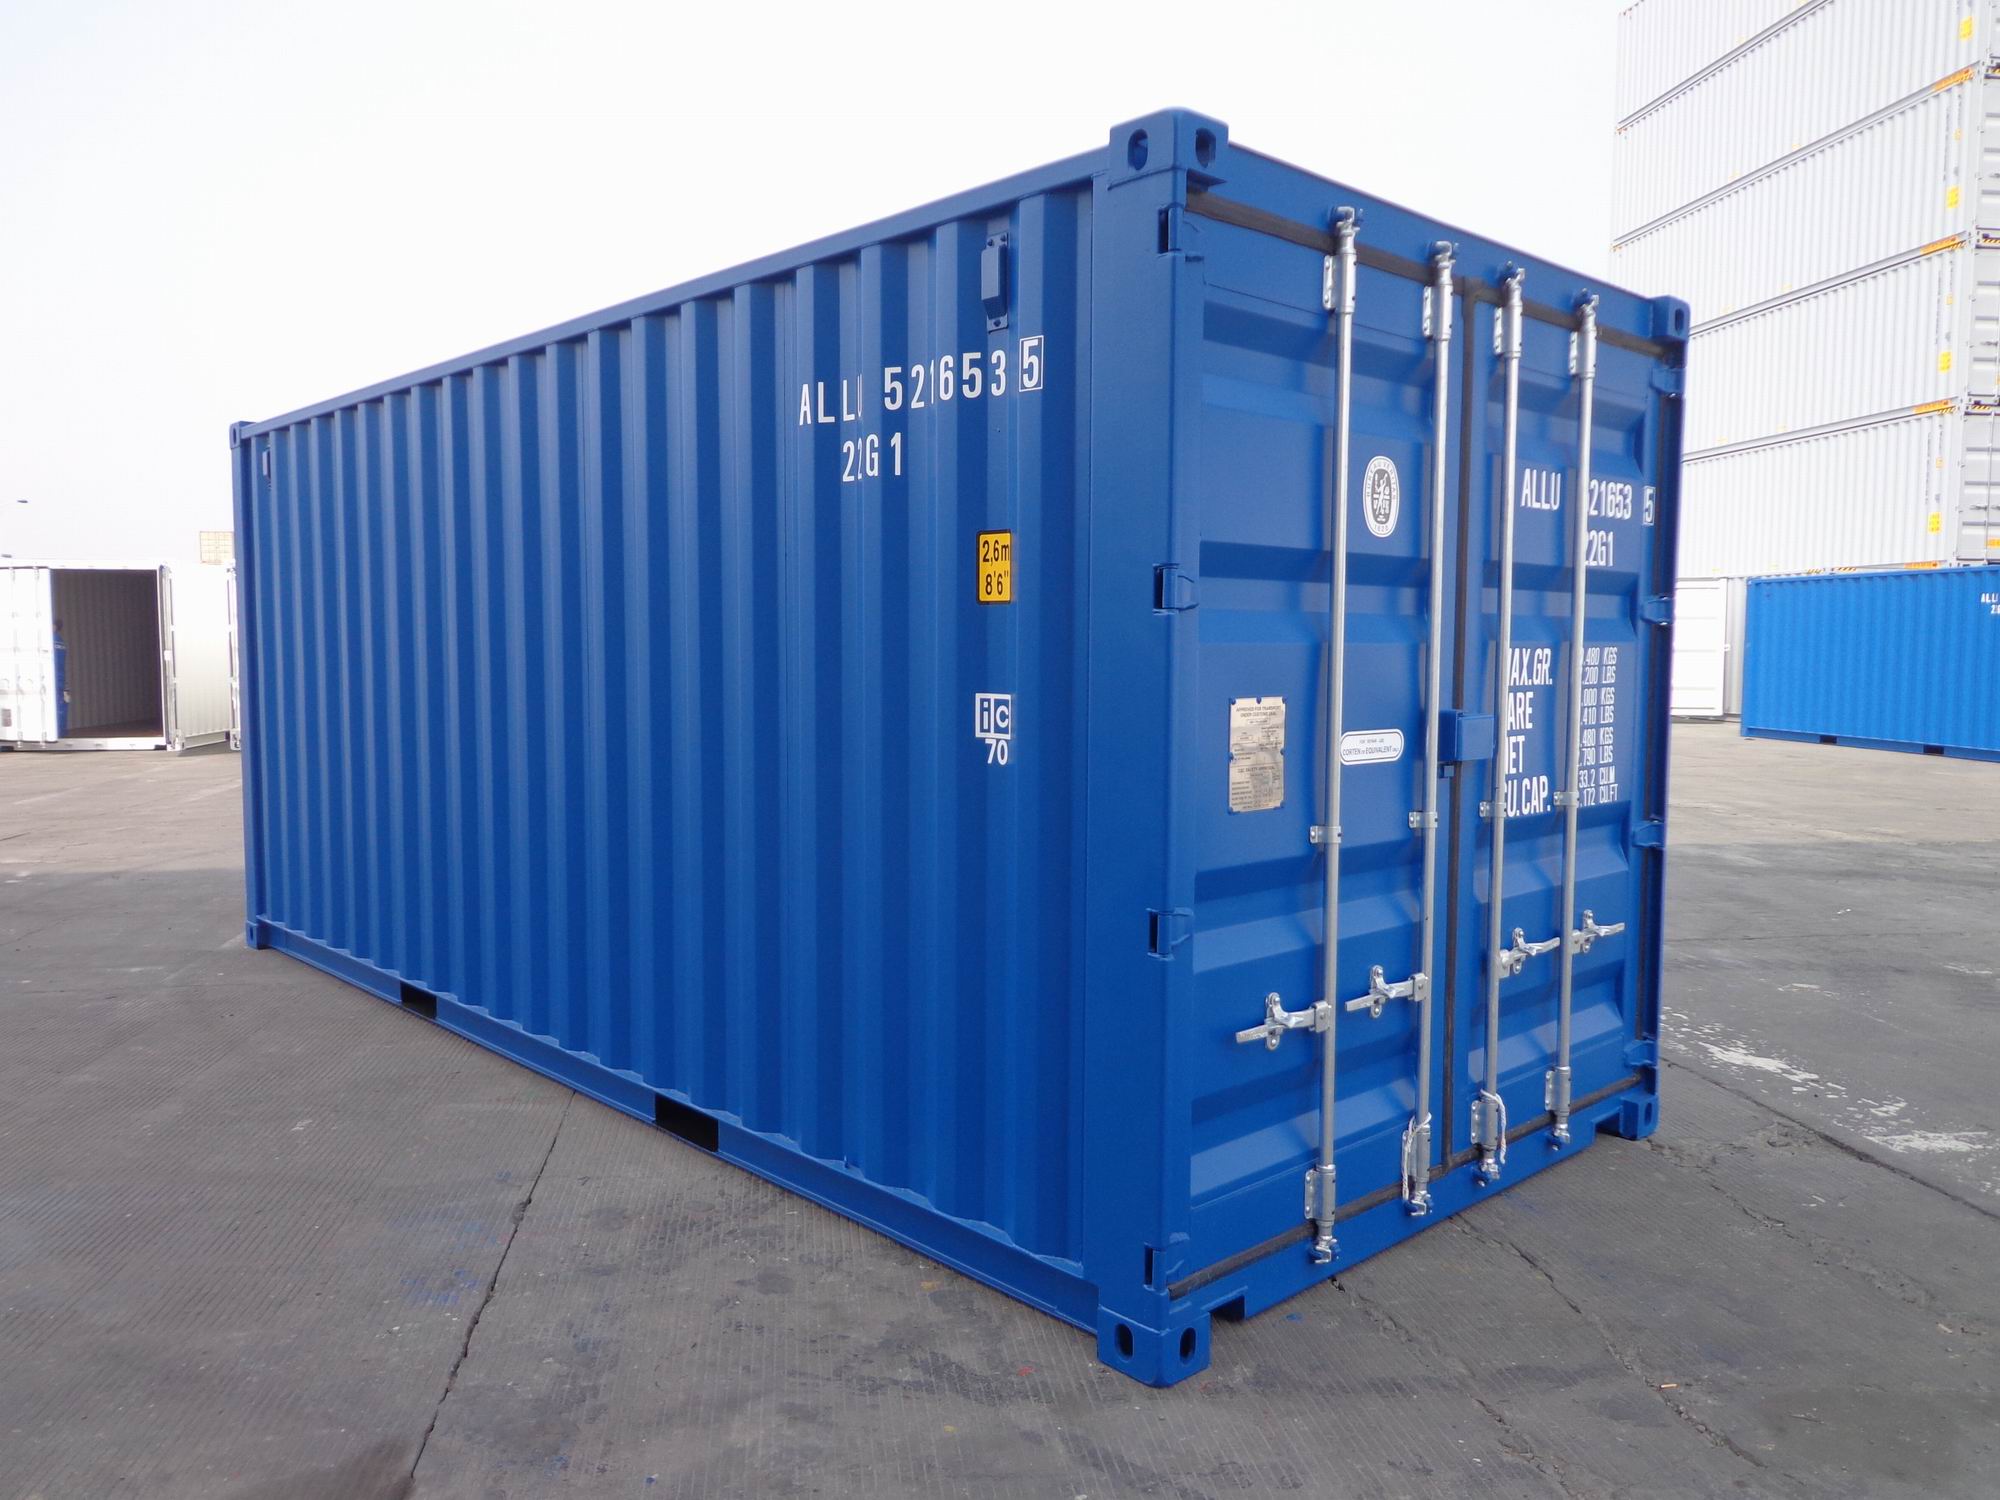 Container meting Hatech